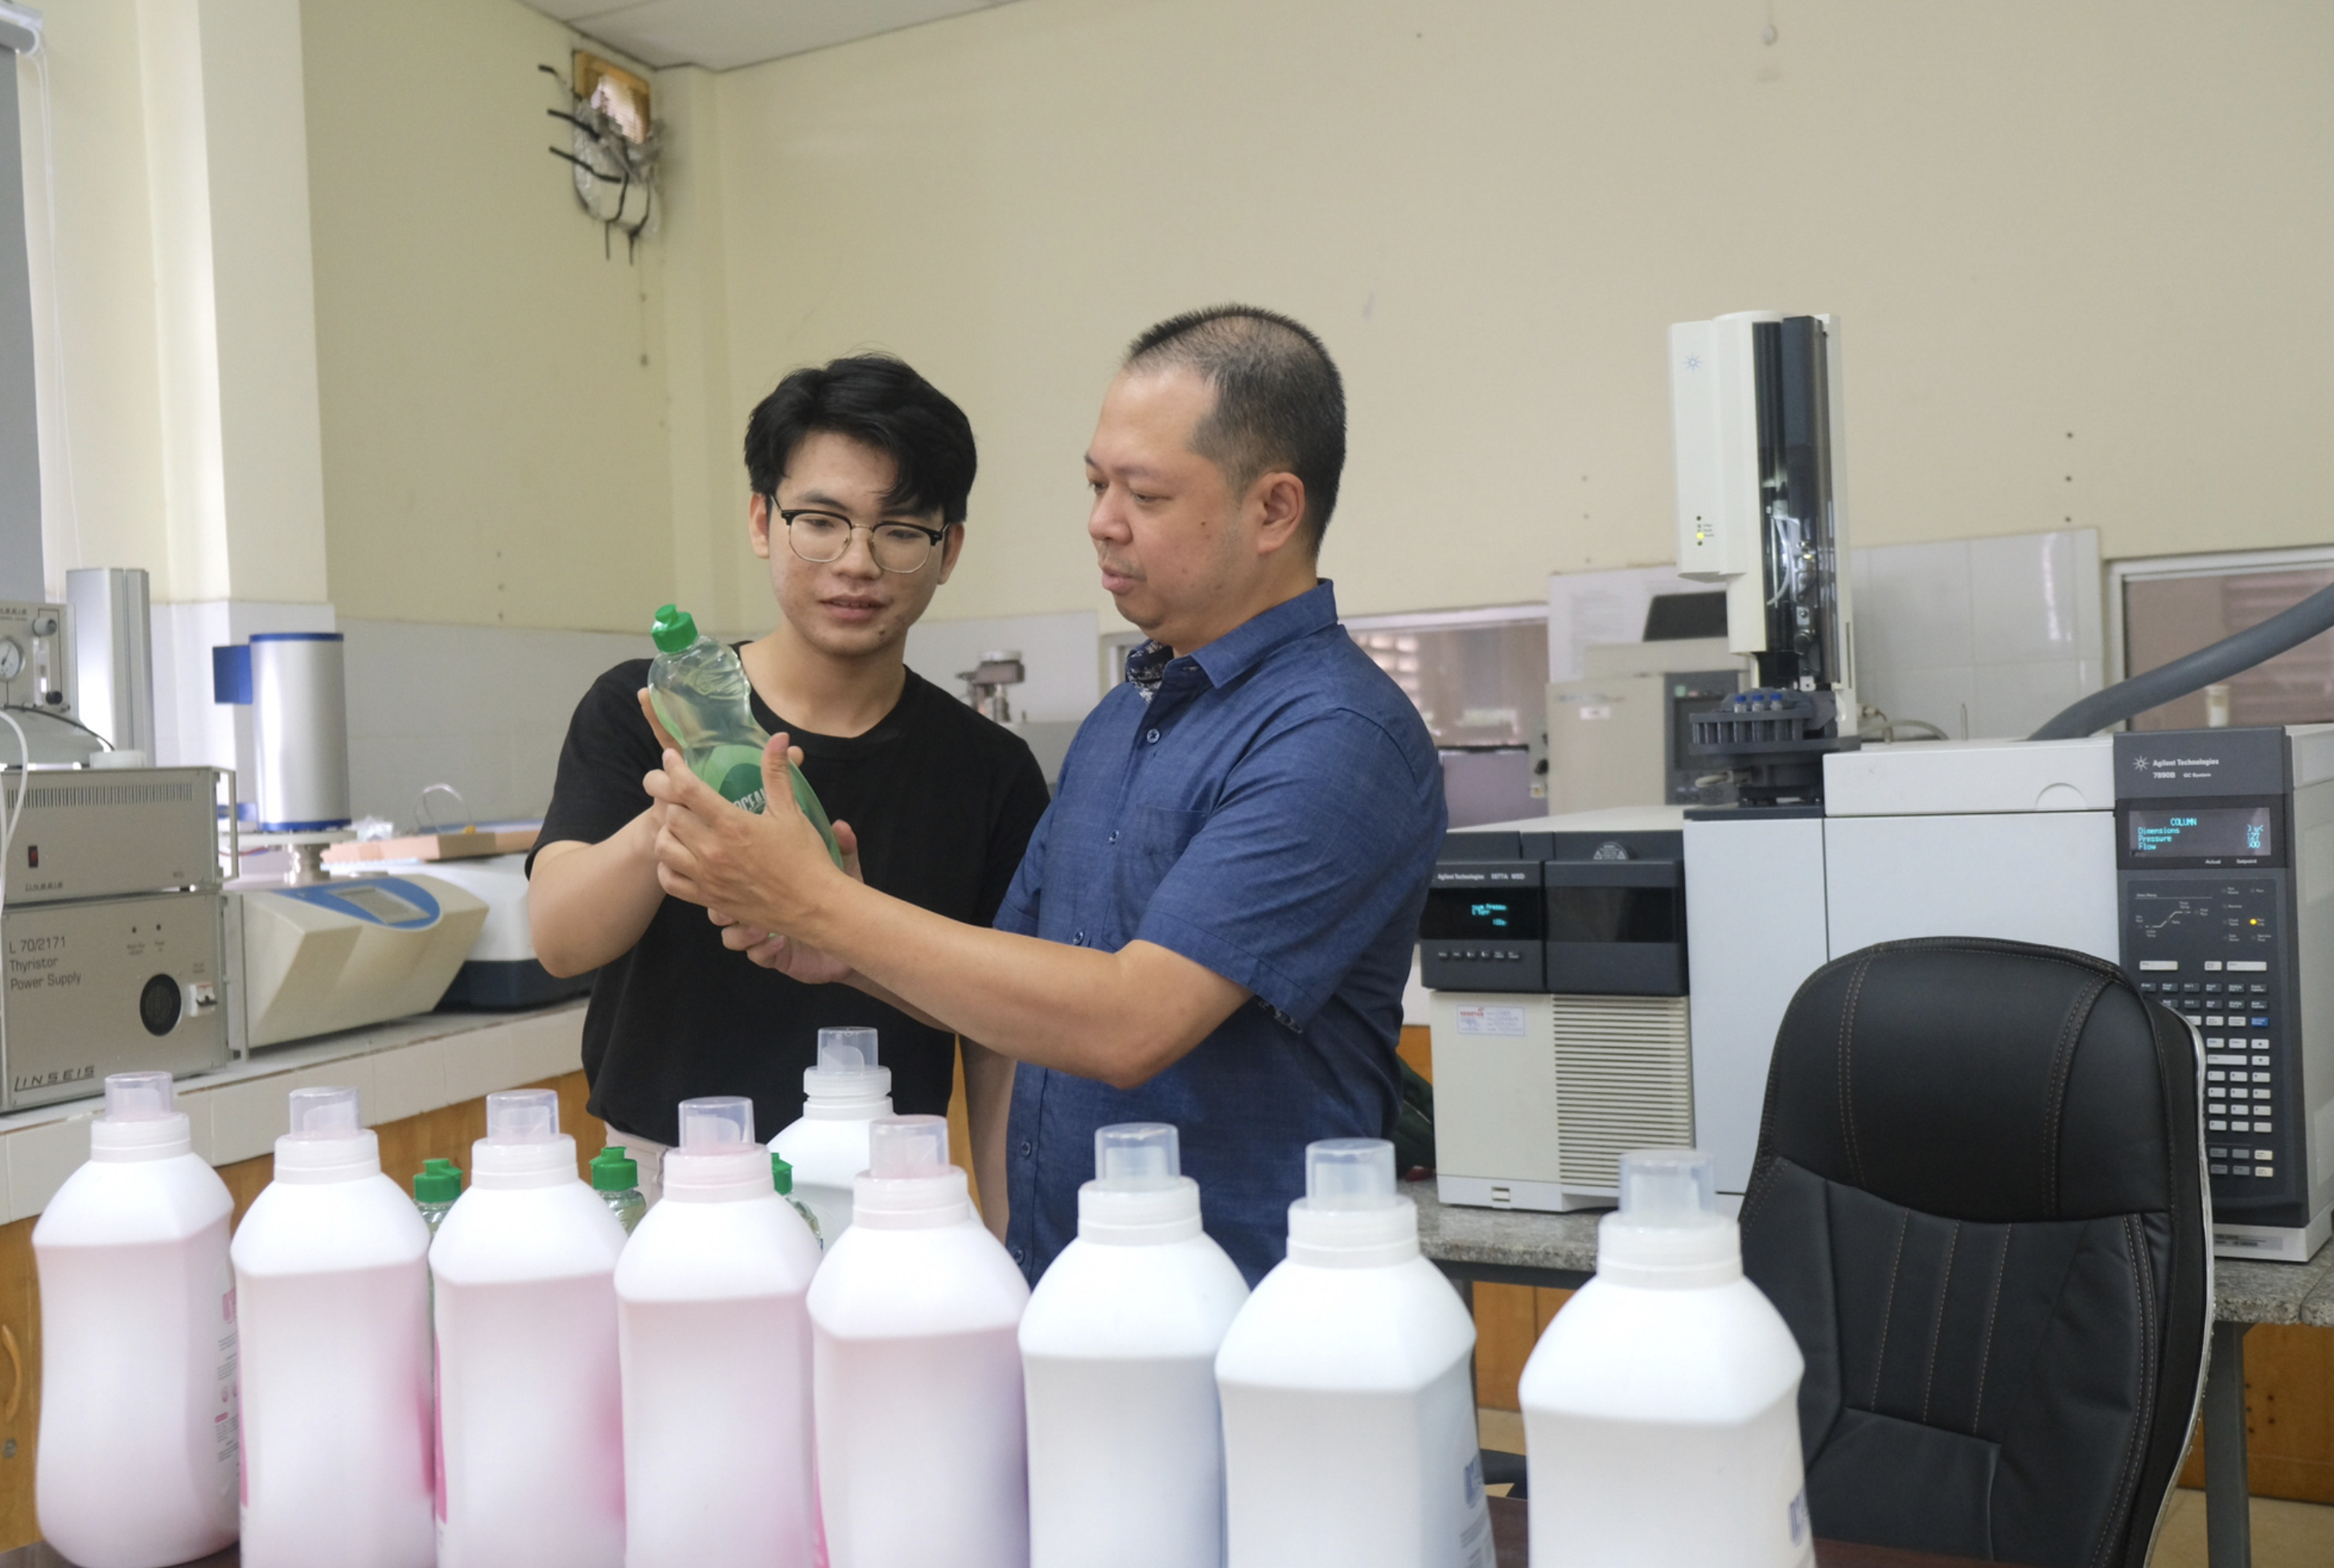 Ngo Tran Bao Viet (L), a junior at Ho Chi Minh City University of Technology, introduces detergent products made by him to Associate Prof. Dr. Nguyen Dinh Quan. Photo: Ngoc Phuong / Tuoi Tre